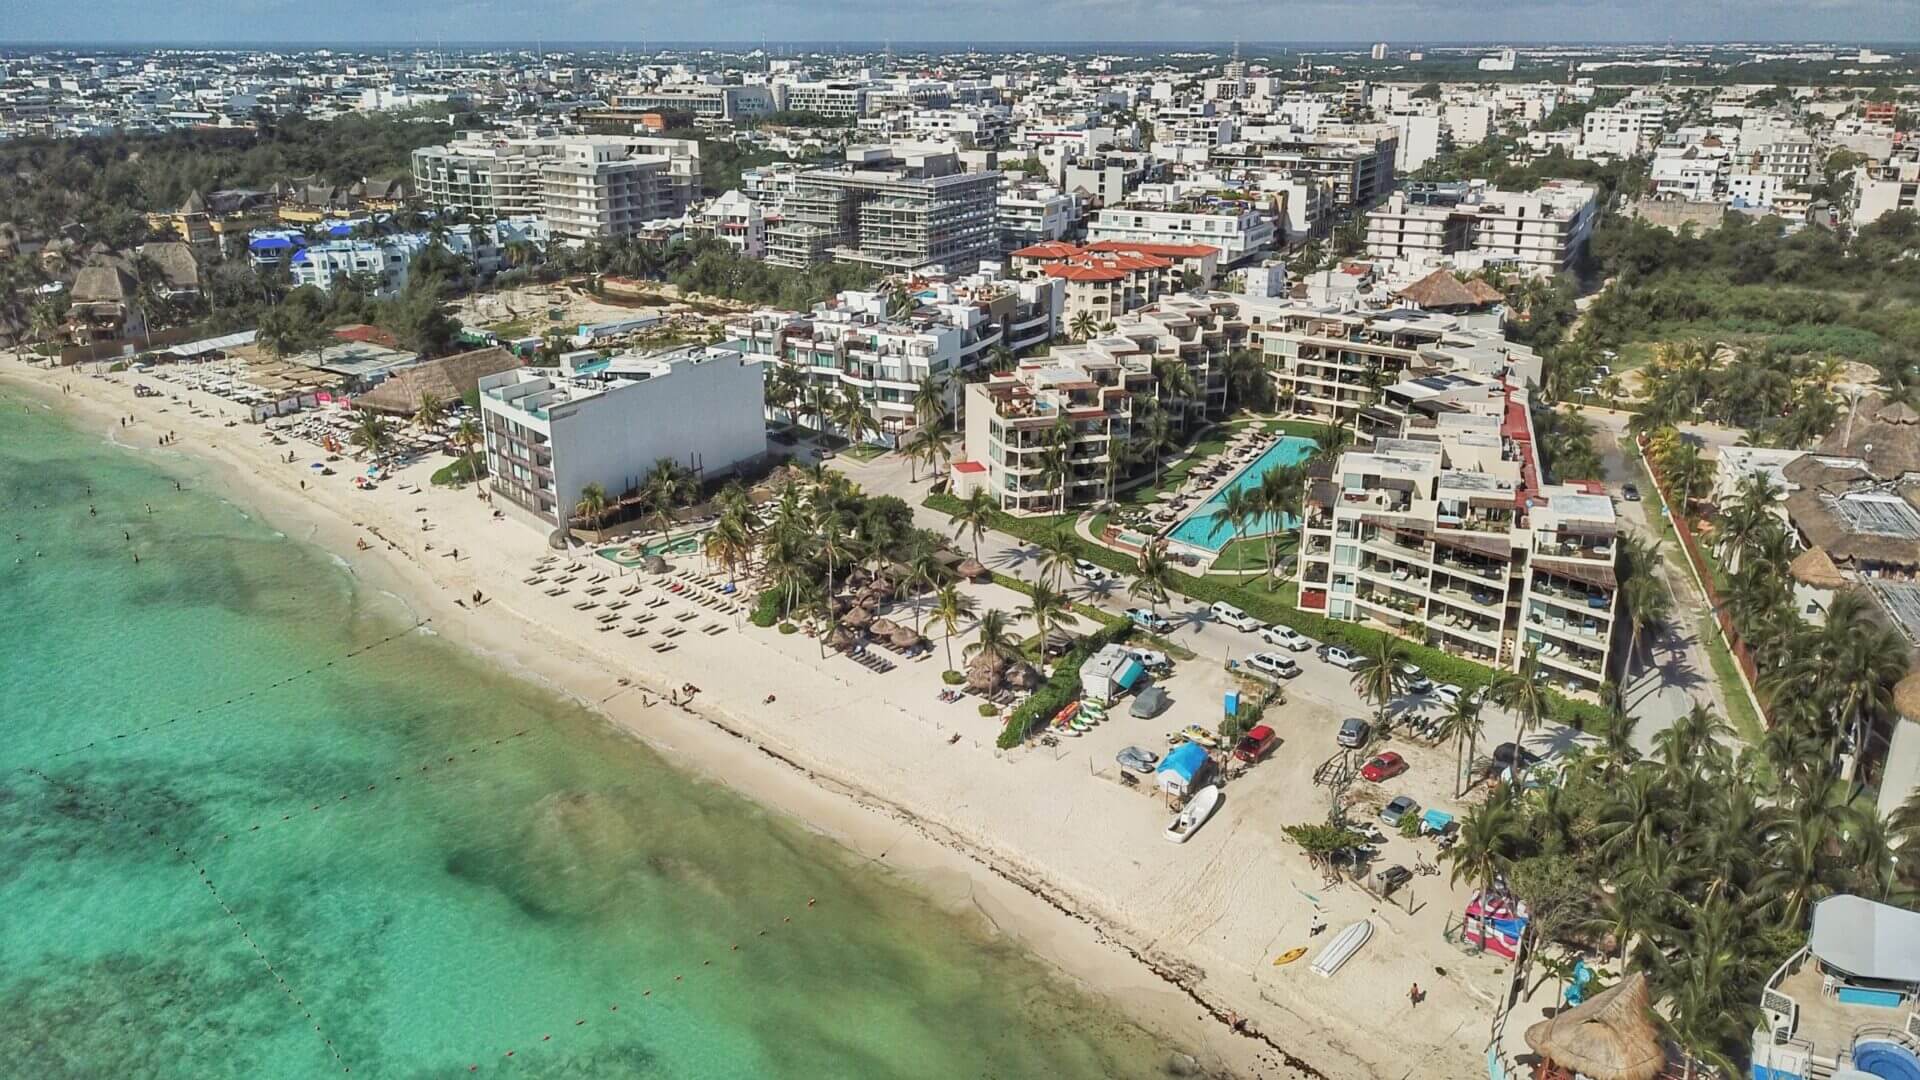 picking the neighborhood in Playa Del Carmen to stay for vacation